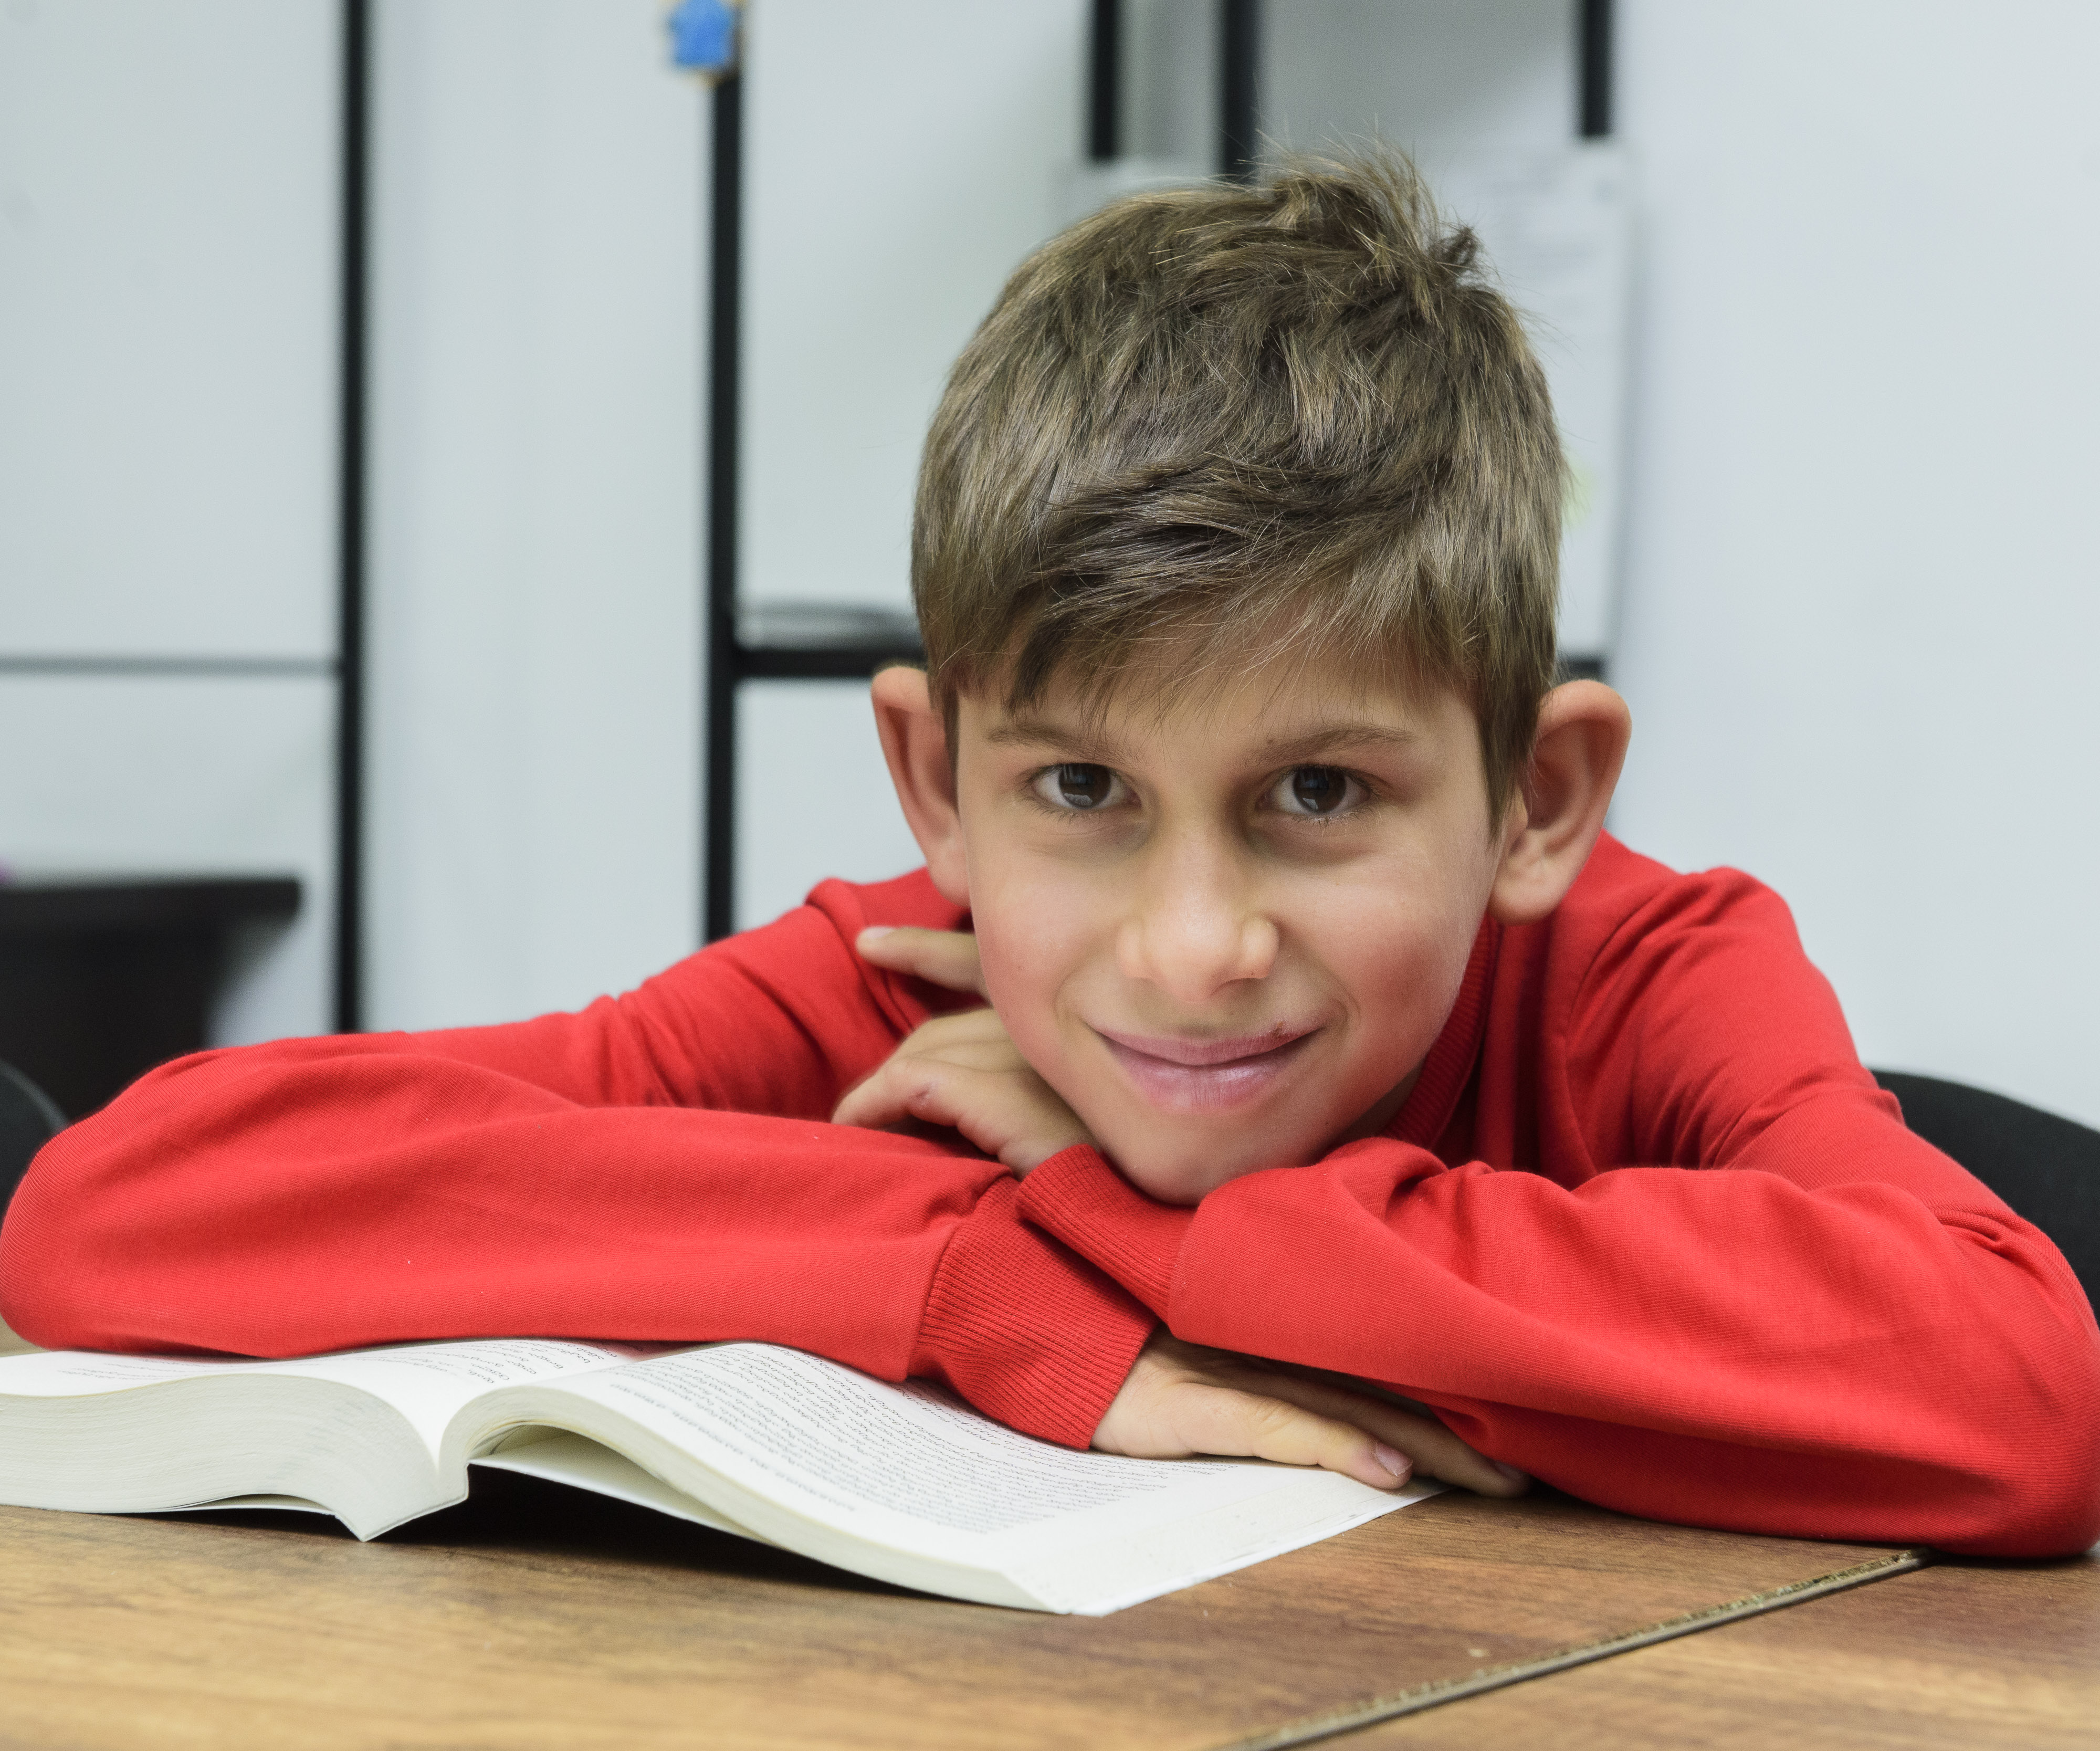 An adolescent boy wearing a read long-sleeve shirt is leaning on a book smiling